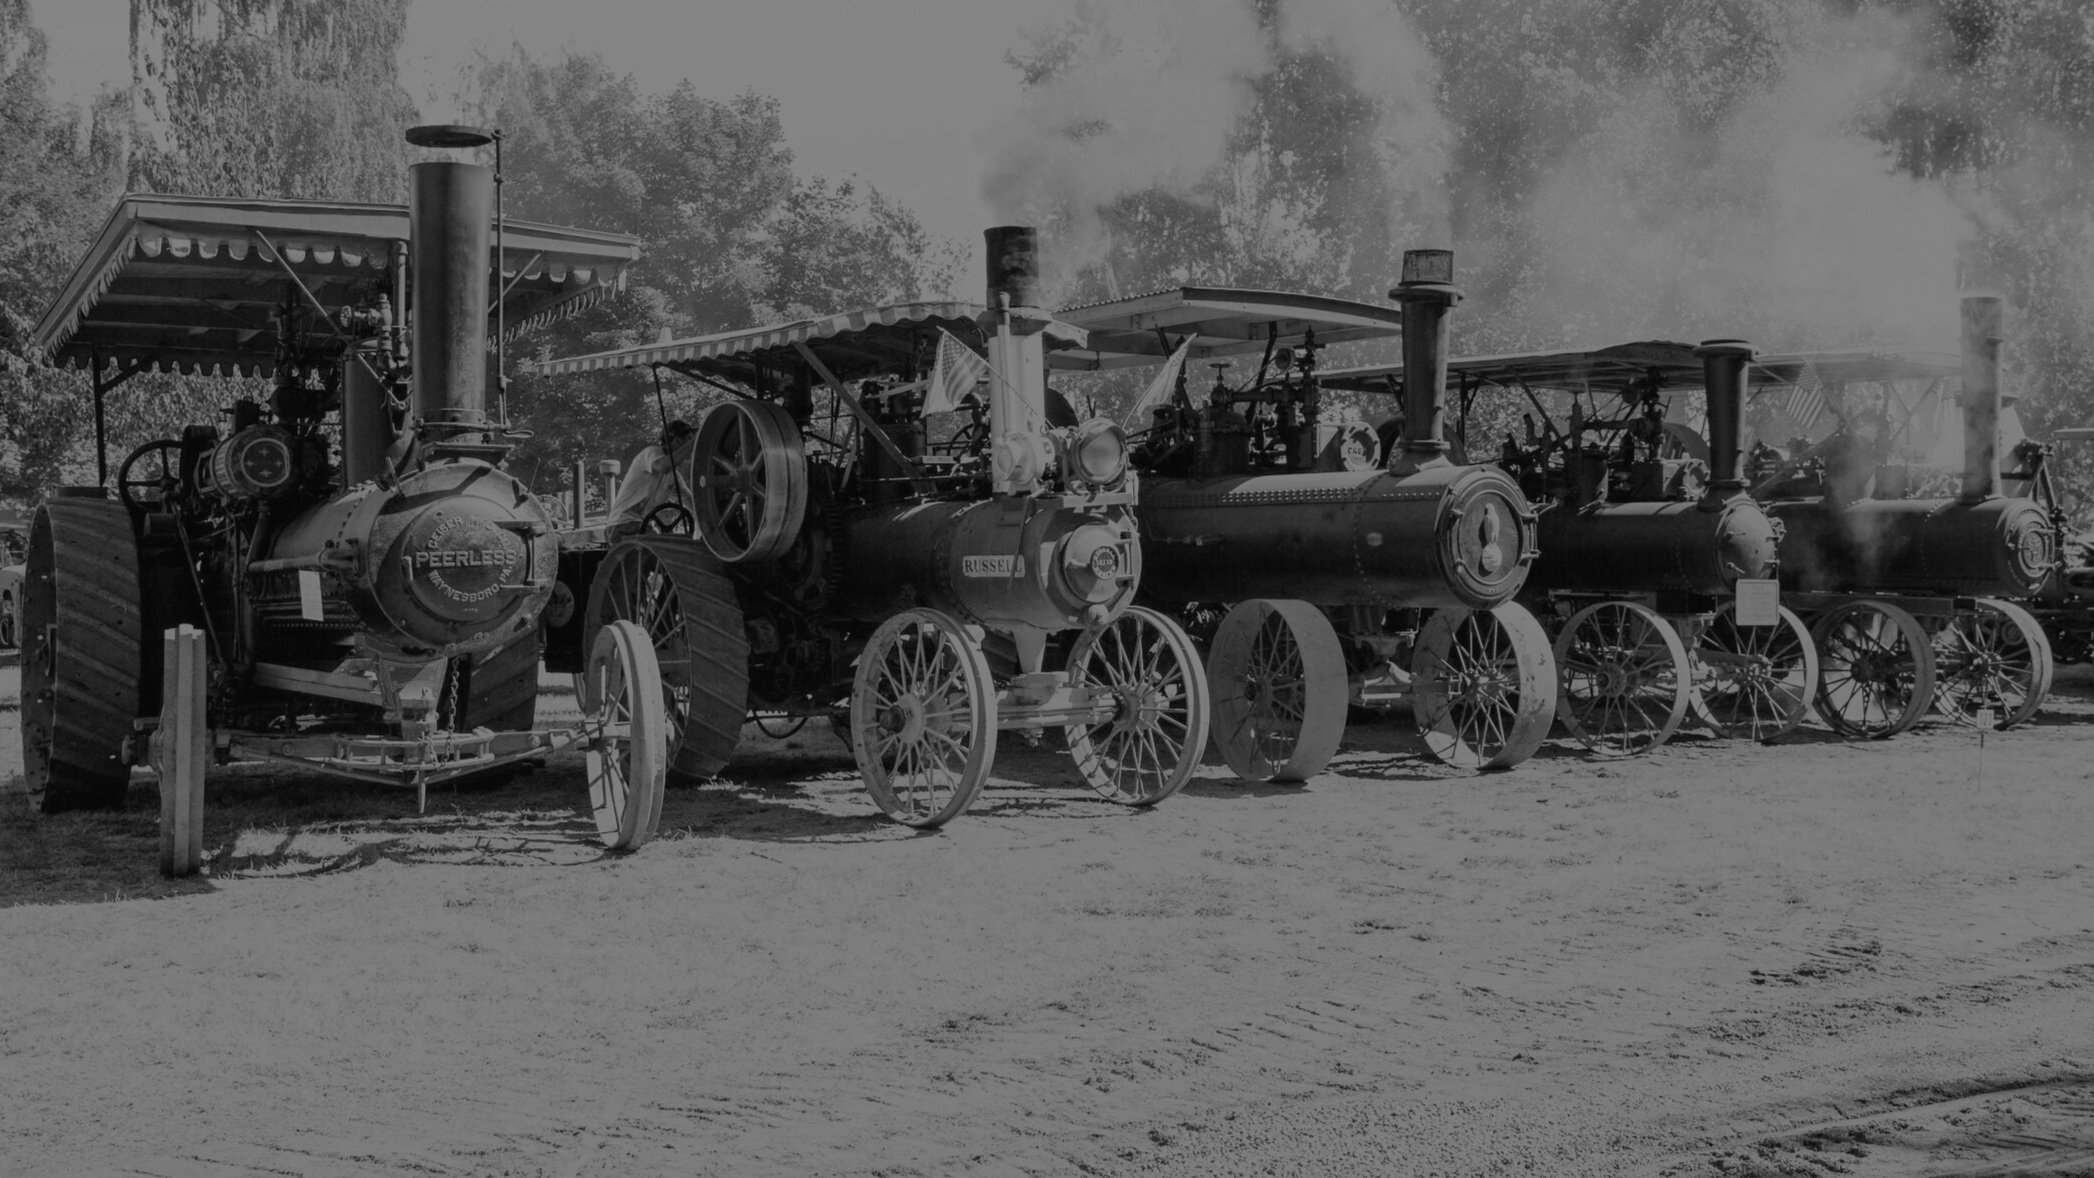 The Great Oregon Steam-Up — Powerland Heritage Park